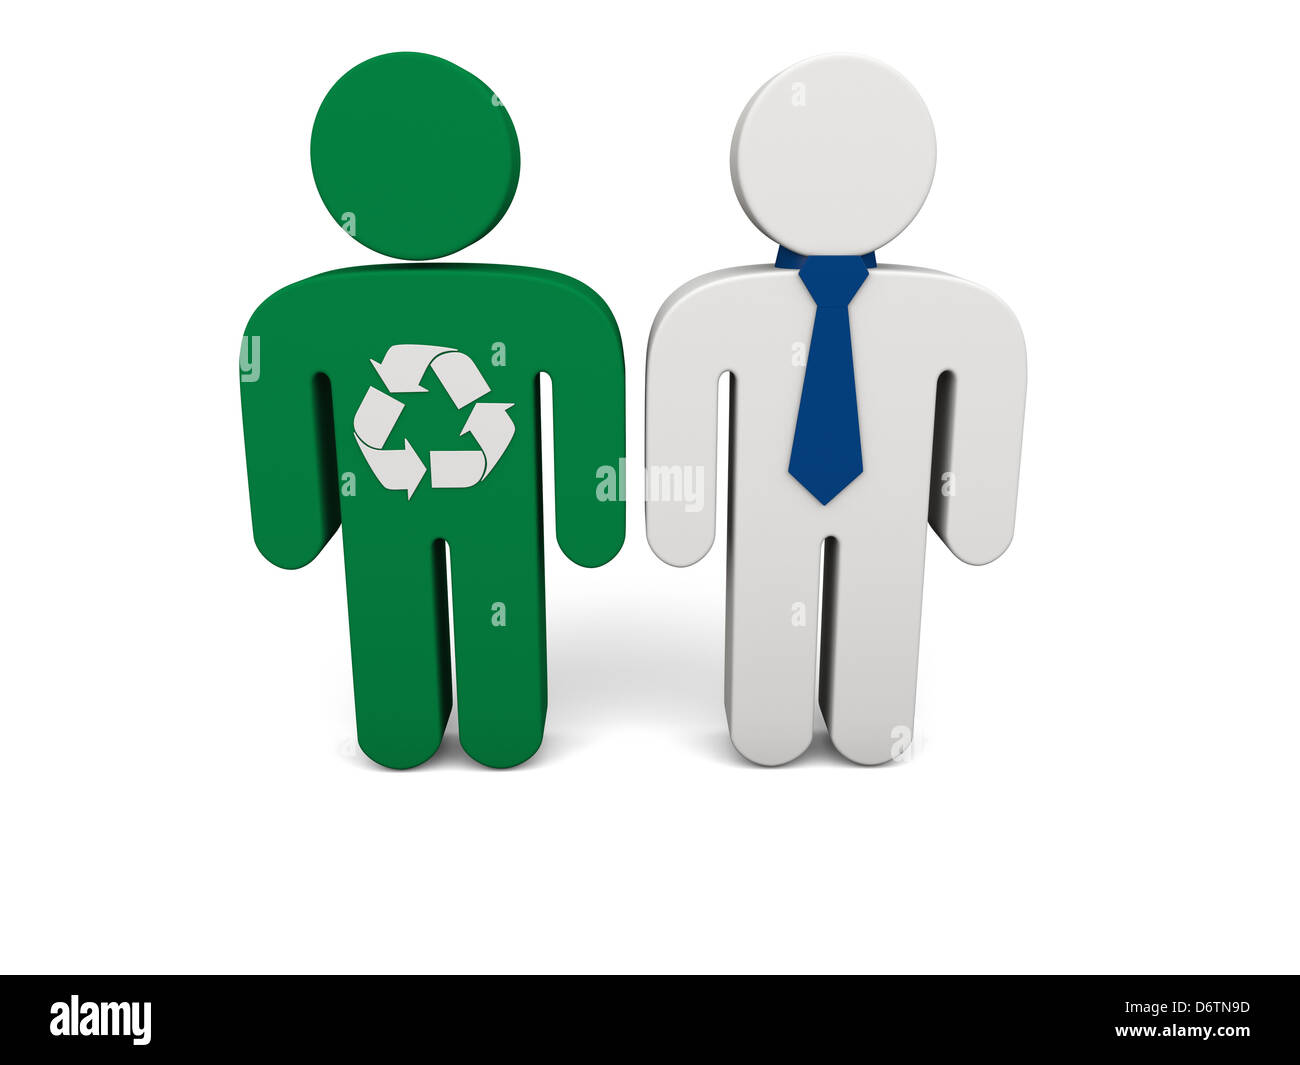 Concept of ecology and business. Illustration of green person and office person isolated on white background. Stock Photo